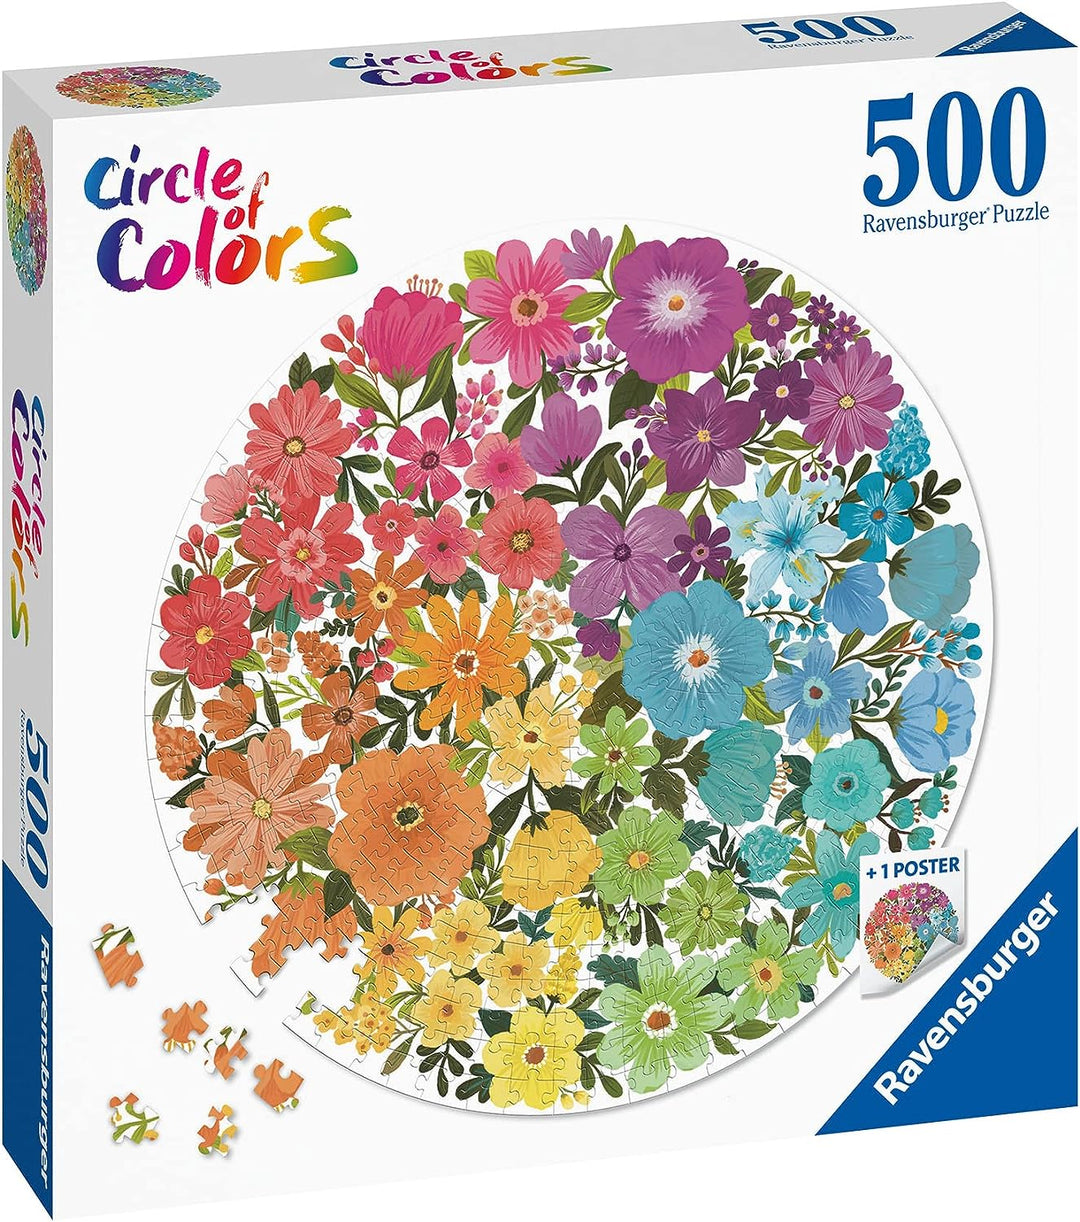 Ravensburger 17167 Circle of Colours-Flowers 500 Piece Jigsaw Puzzle for Adults and Kids